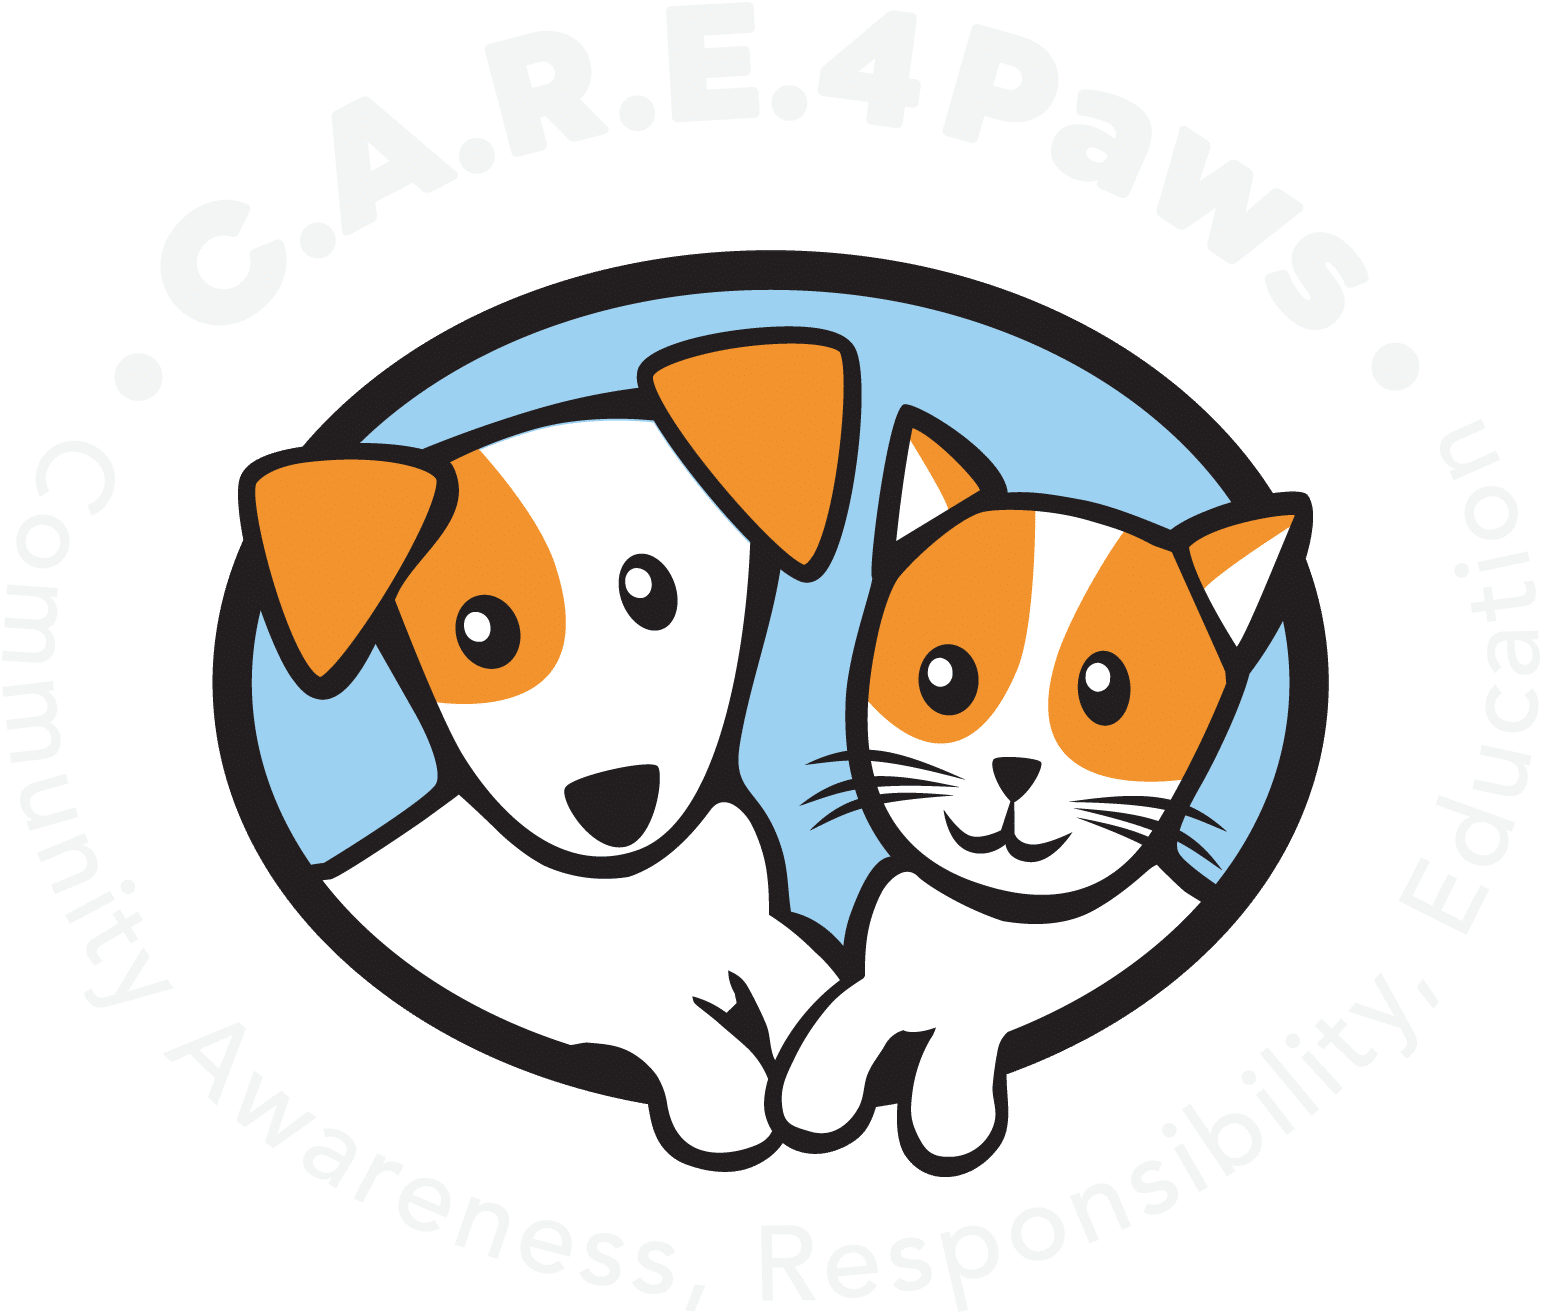 . . works to reduce pet overpopulation, keep  animals out of shelters and improve quality of life for pets and pet owners  in need.